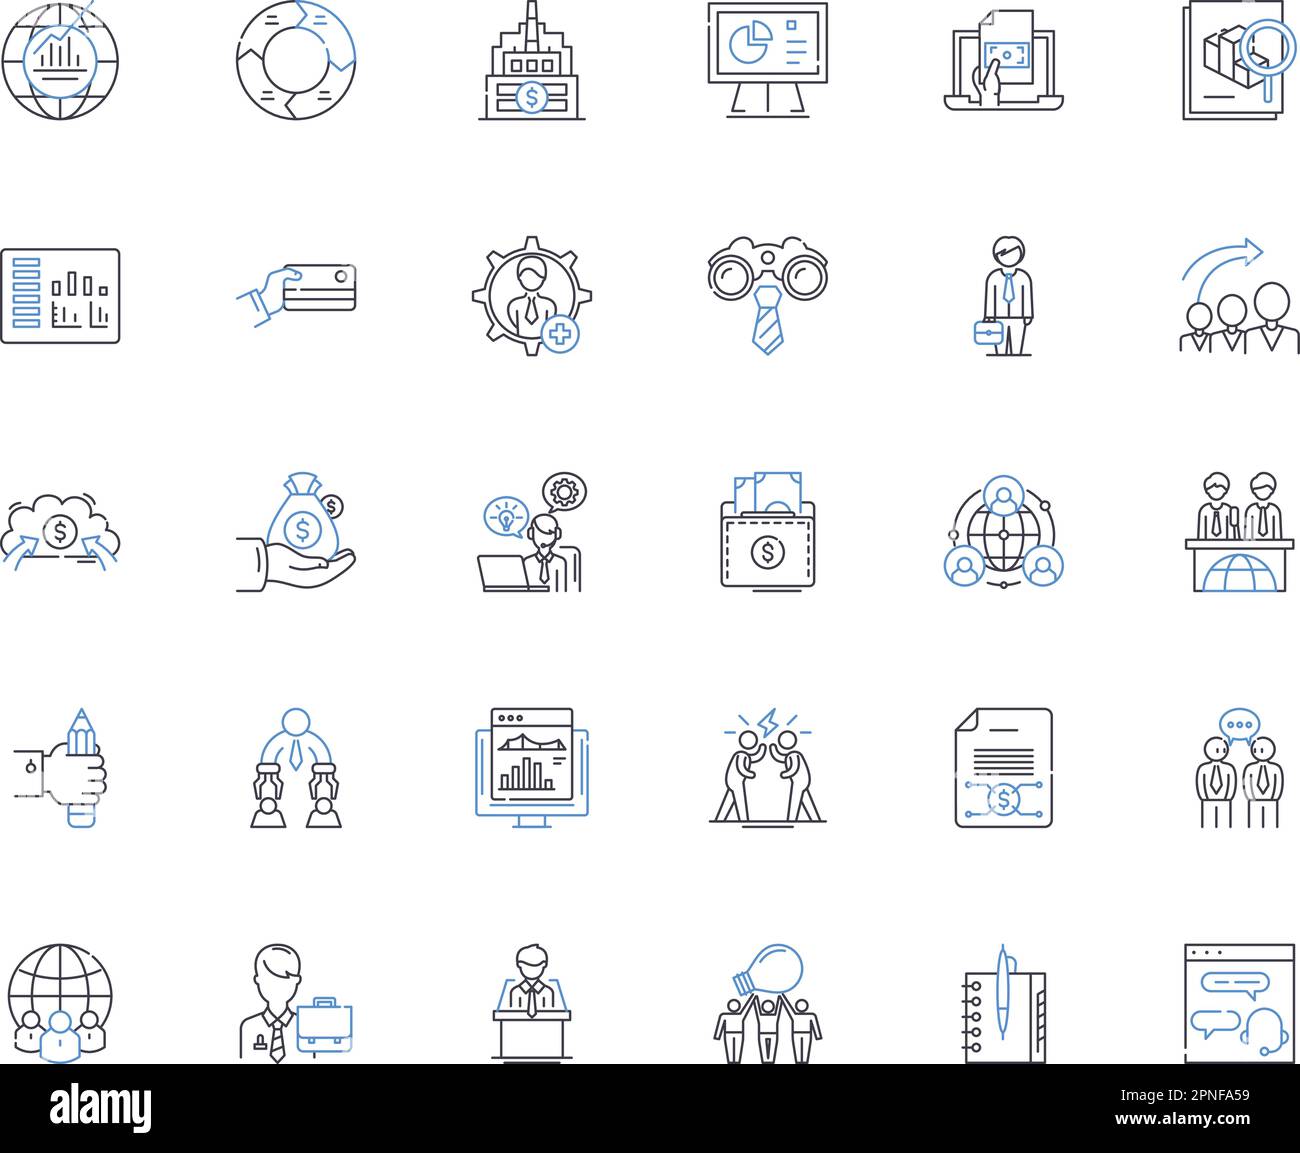 Fiscal plan line icons collection. Budget, Revenue, Deficit, Spending, Taxation, Inflation, Austerity vector and linear illustration. Stabilization Stock Vector